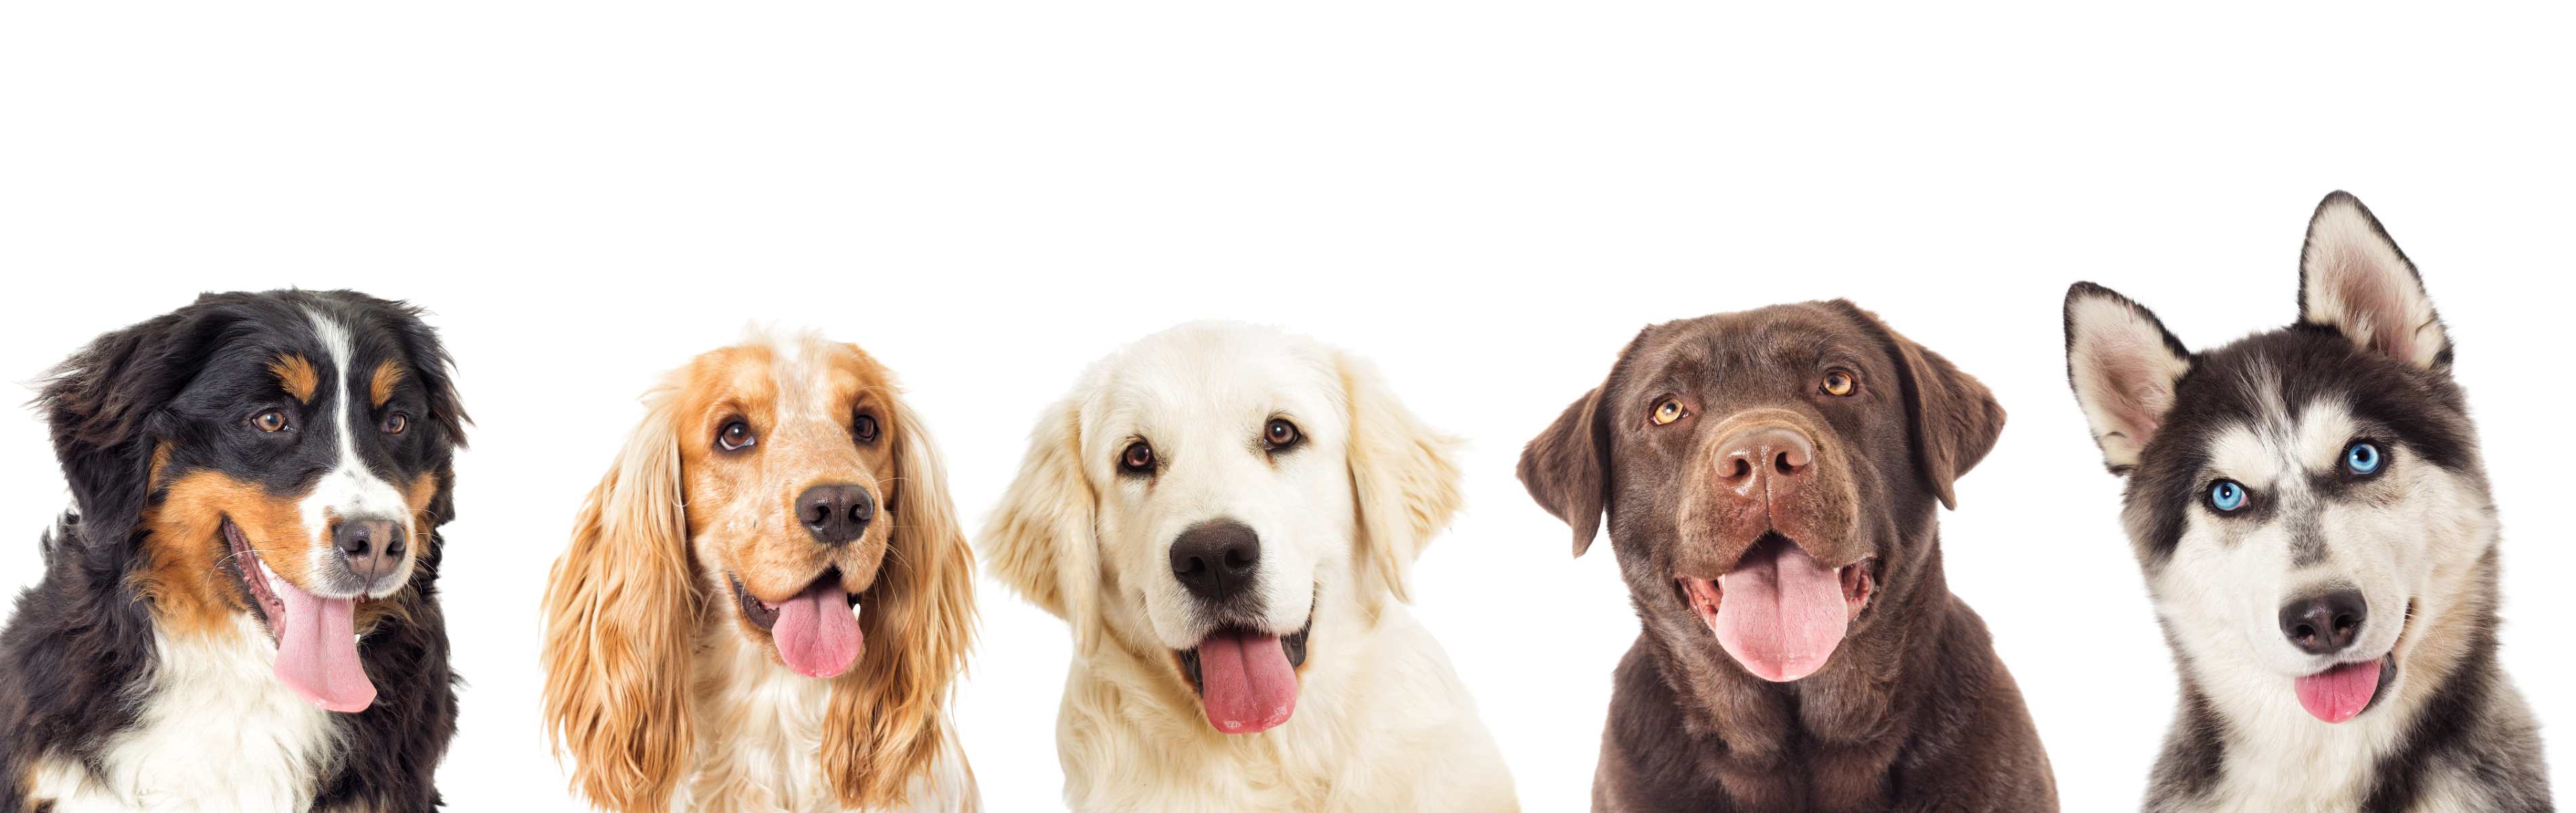 A group of different breeds of dogs - perfect for Dog Training Elite to train.